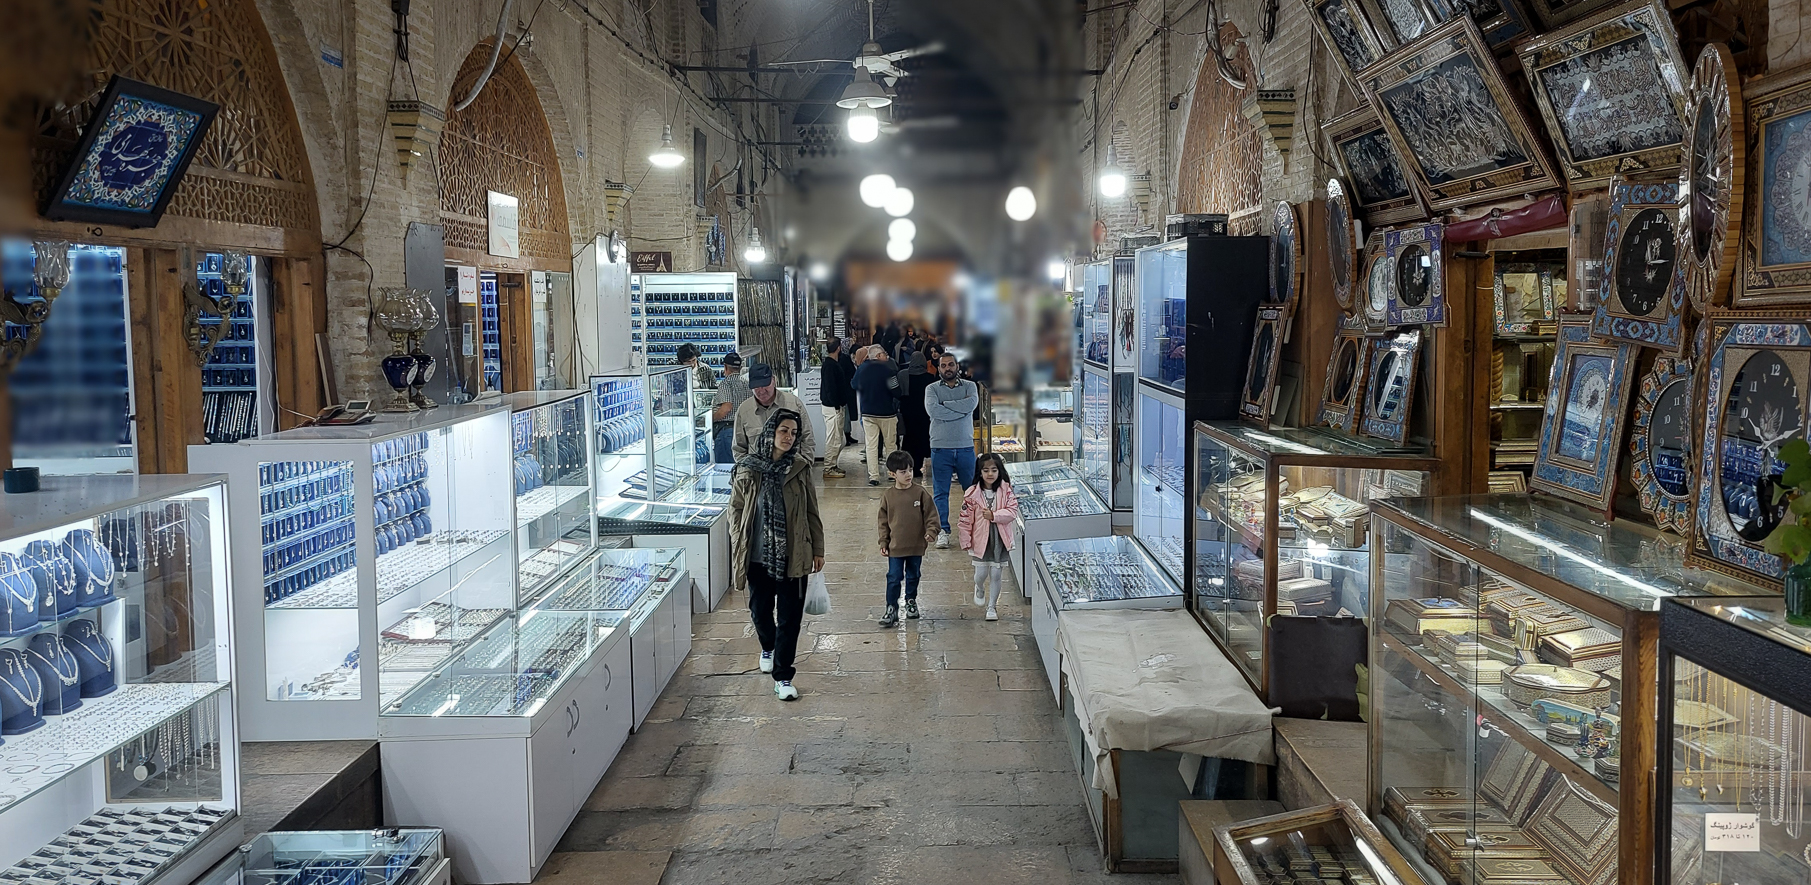 <span  class="uc_style_uc_tiles_grid_image_elementor_uc_items_attribute_title" style="color:#ffffff;">Souq in Shiraz</span>